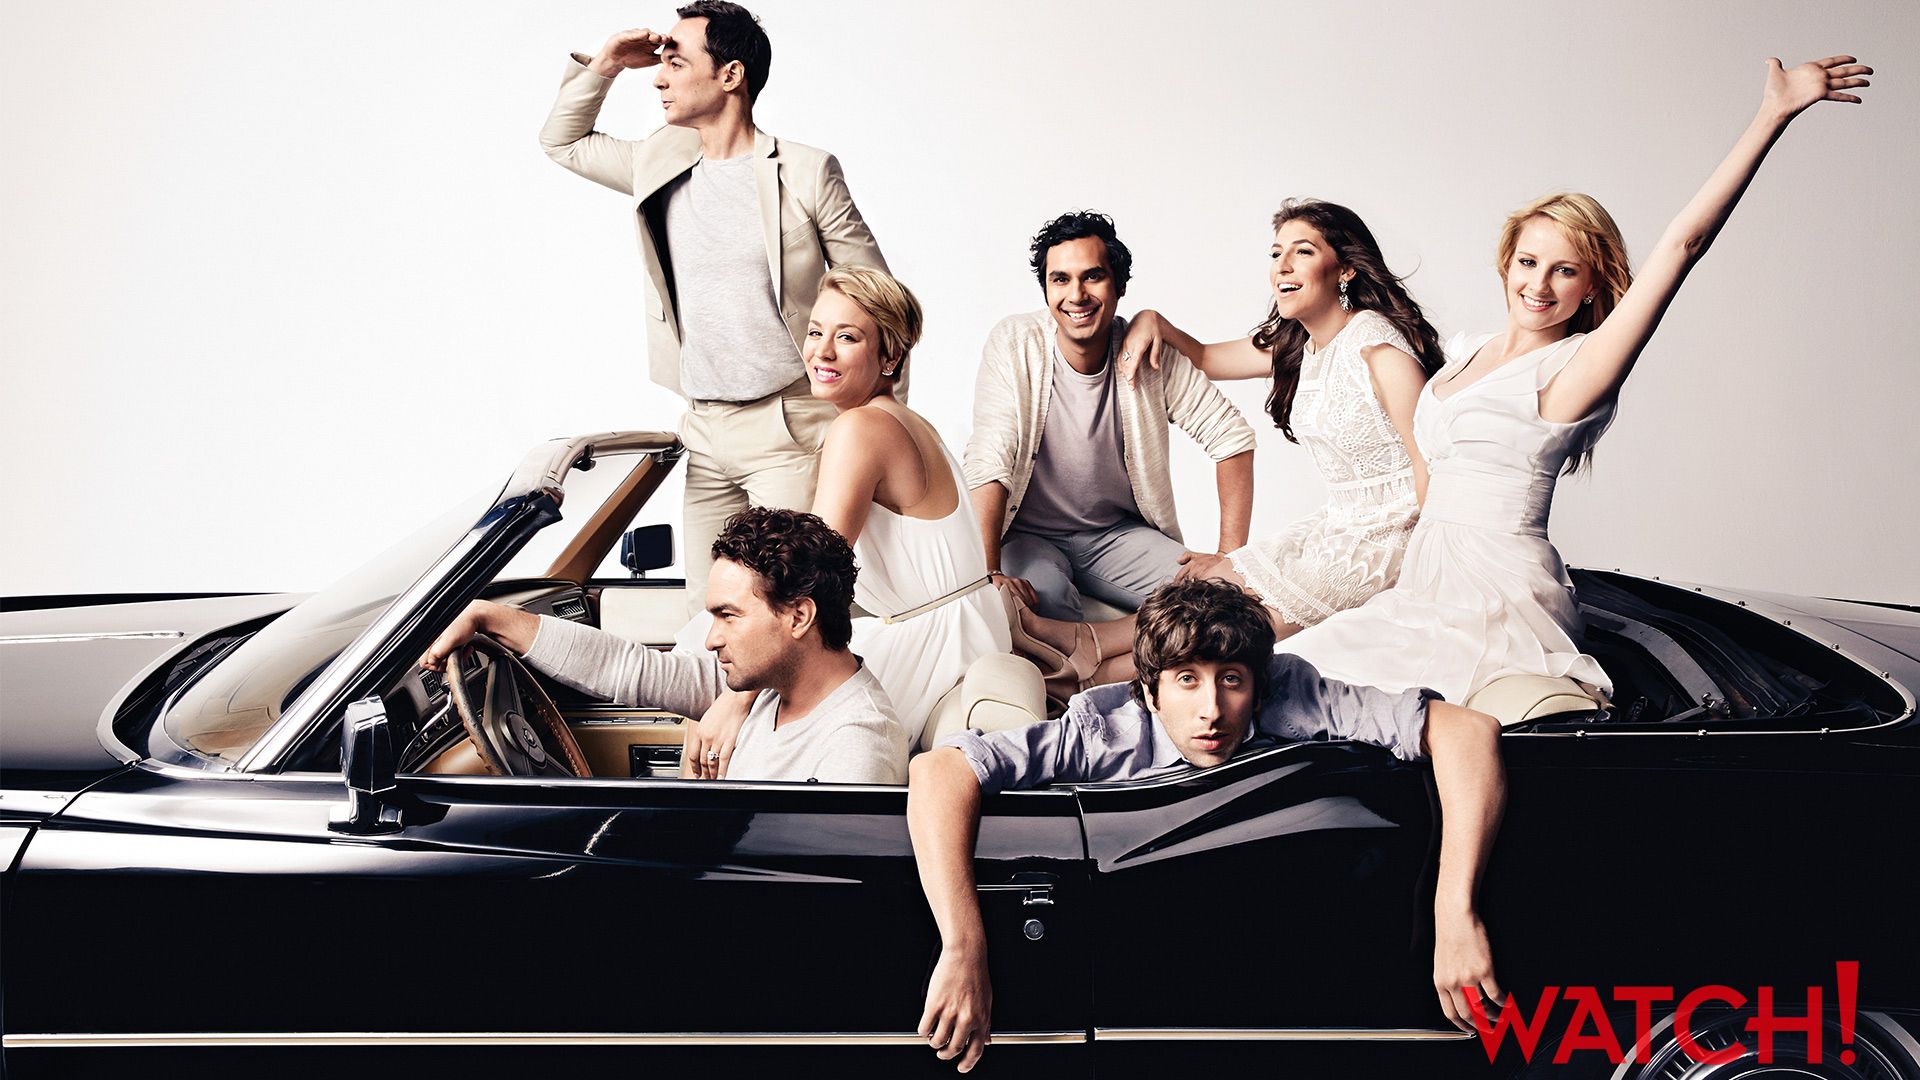 The Big Bang Theory Stars Look Spectacular In These Exclusive Photo! Magazine Photo